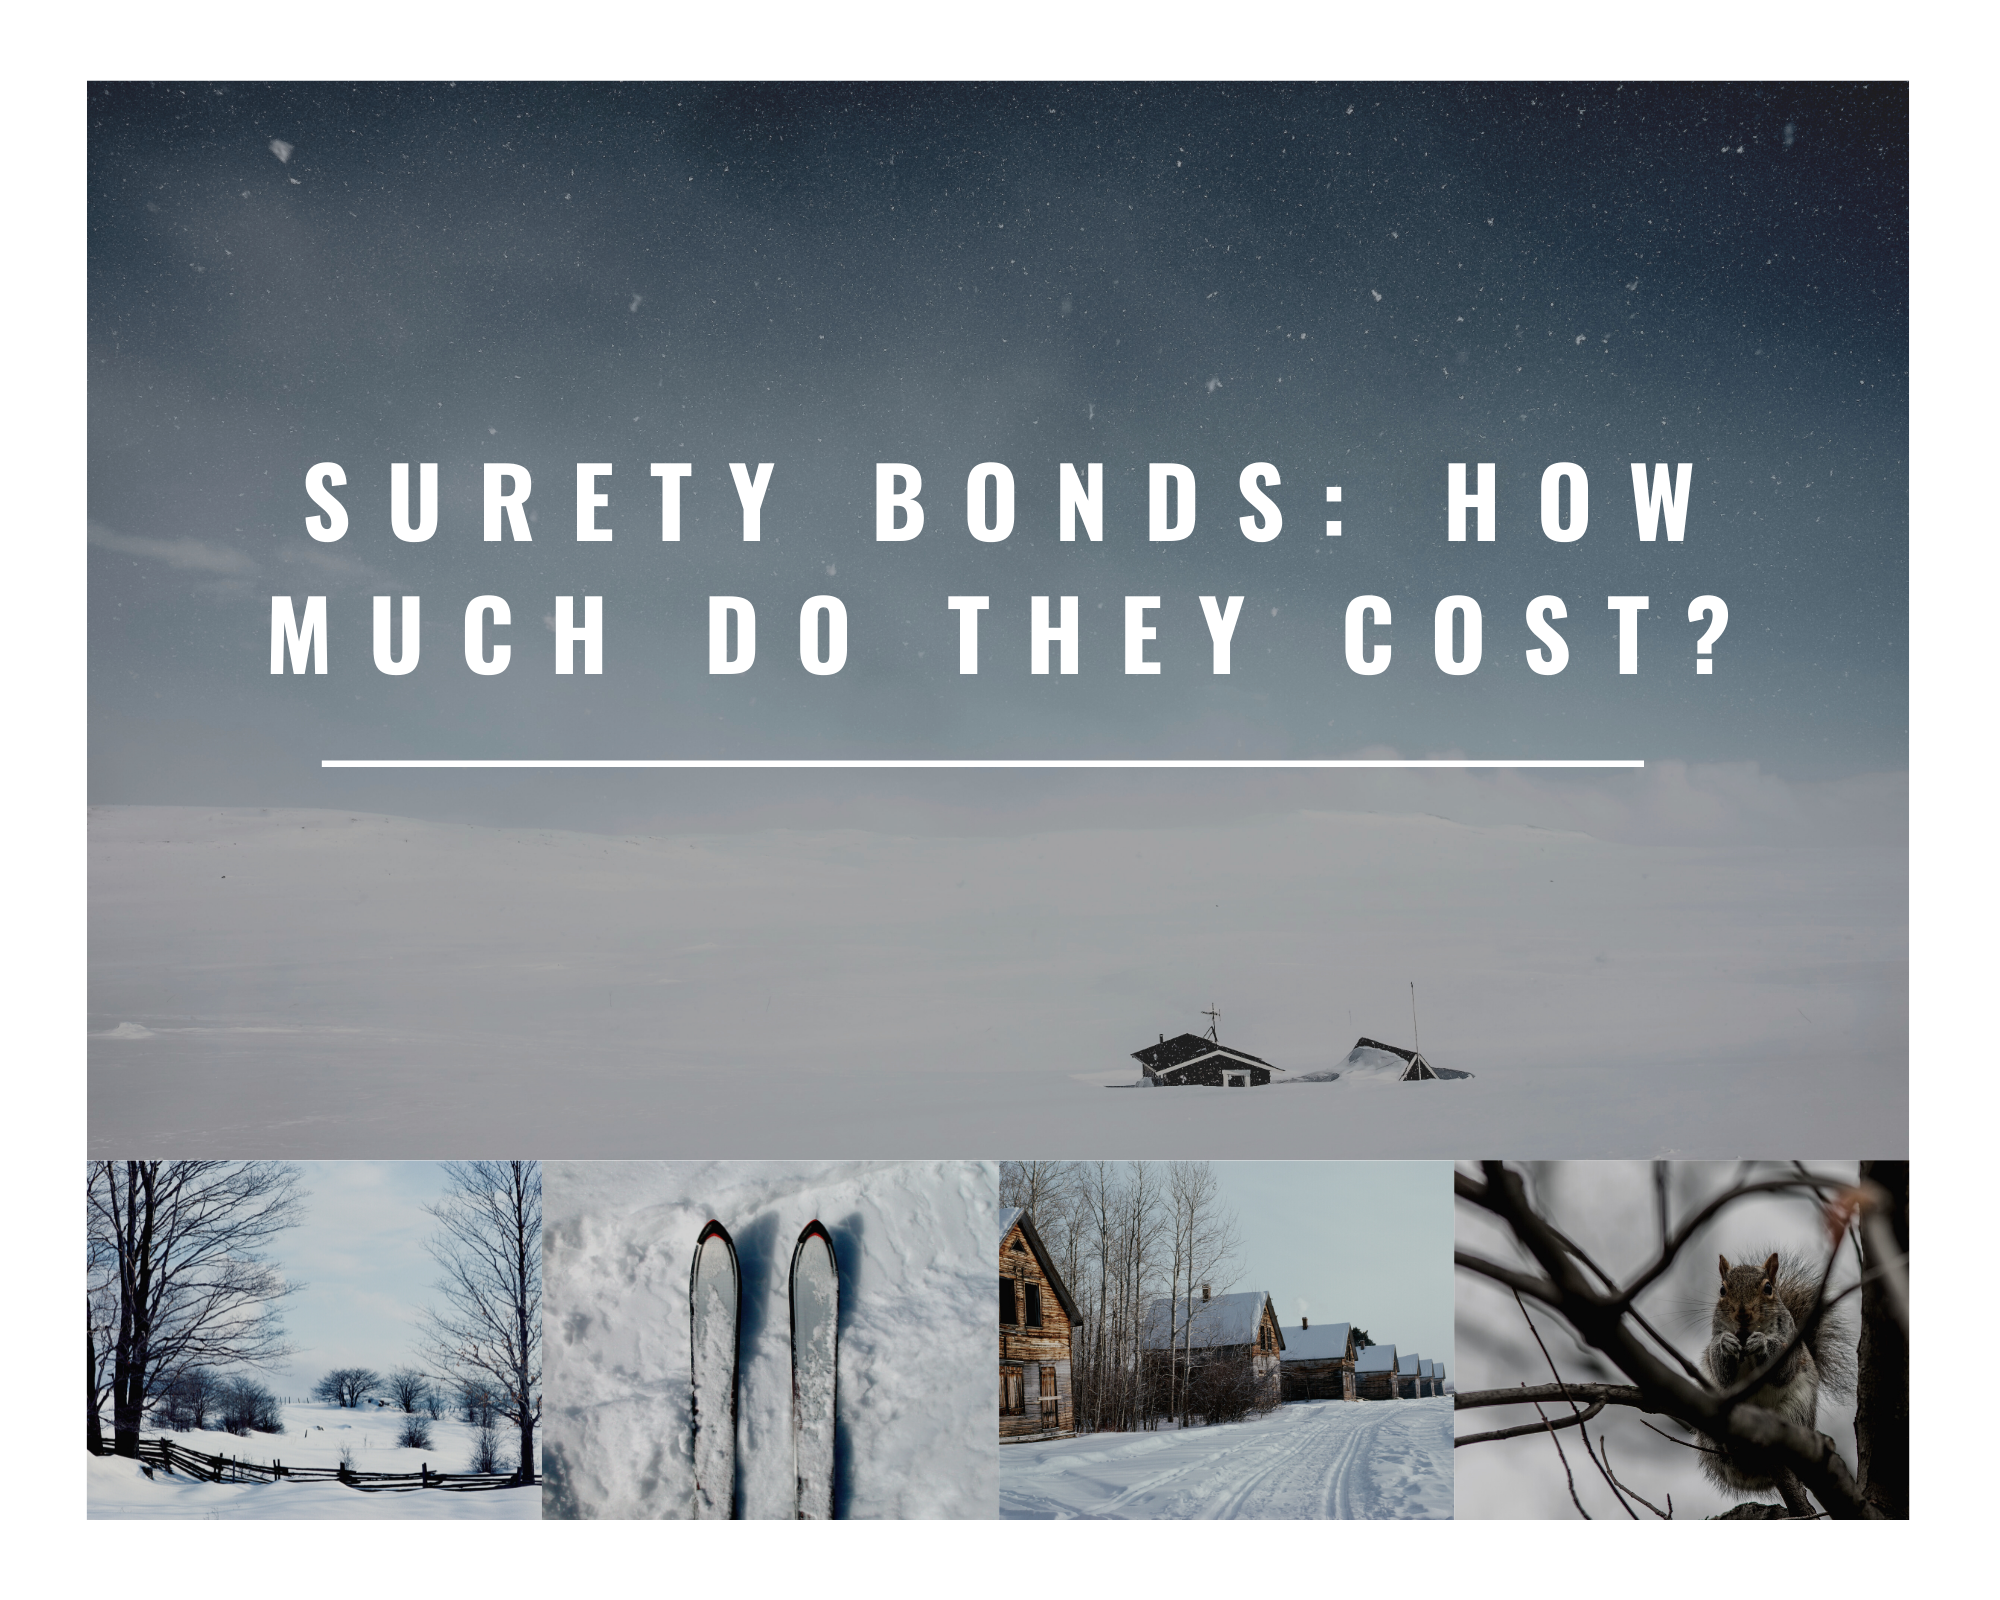 surety bonds - what is the cost of a surety bond - winter in canada